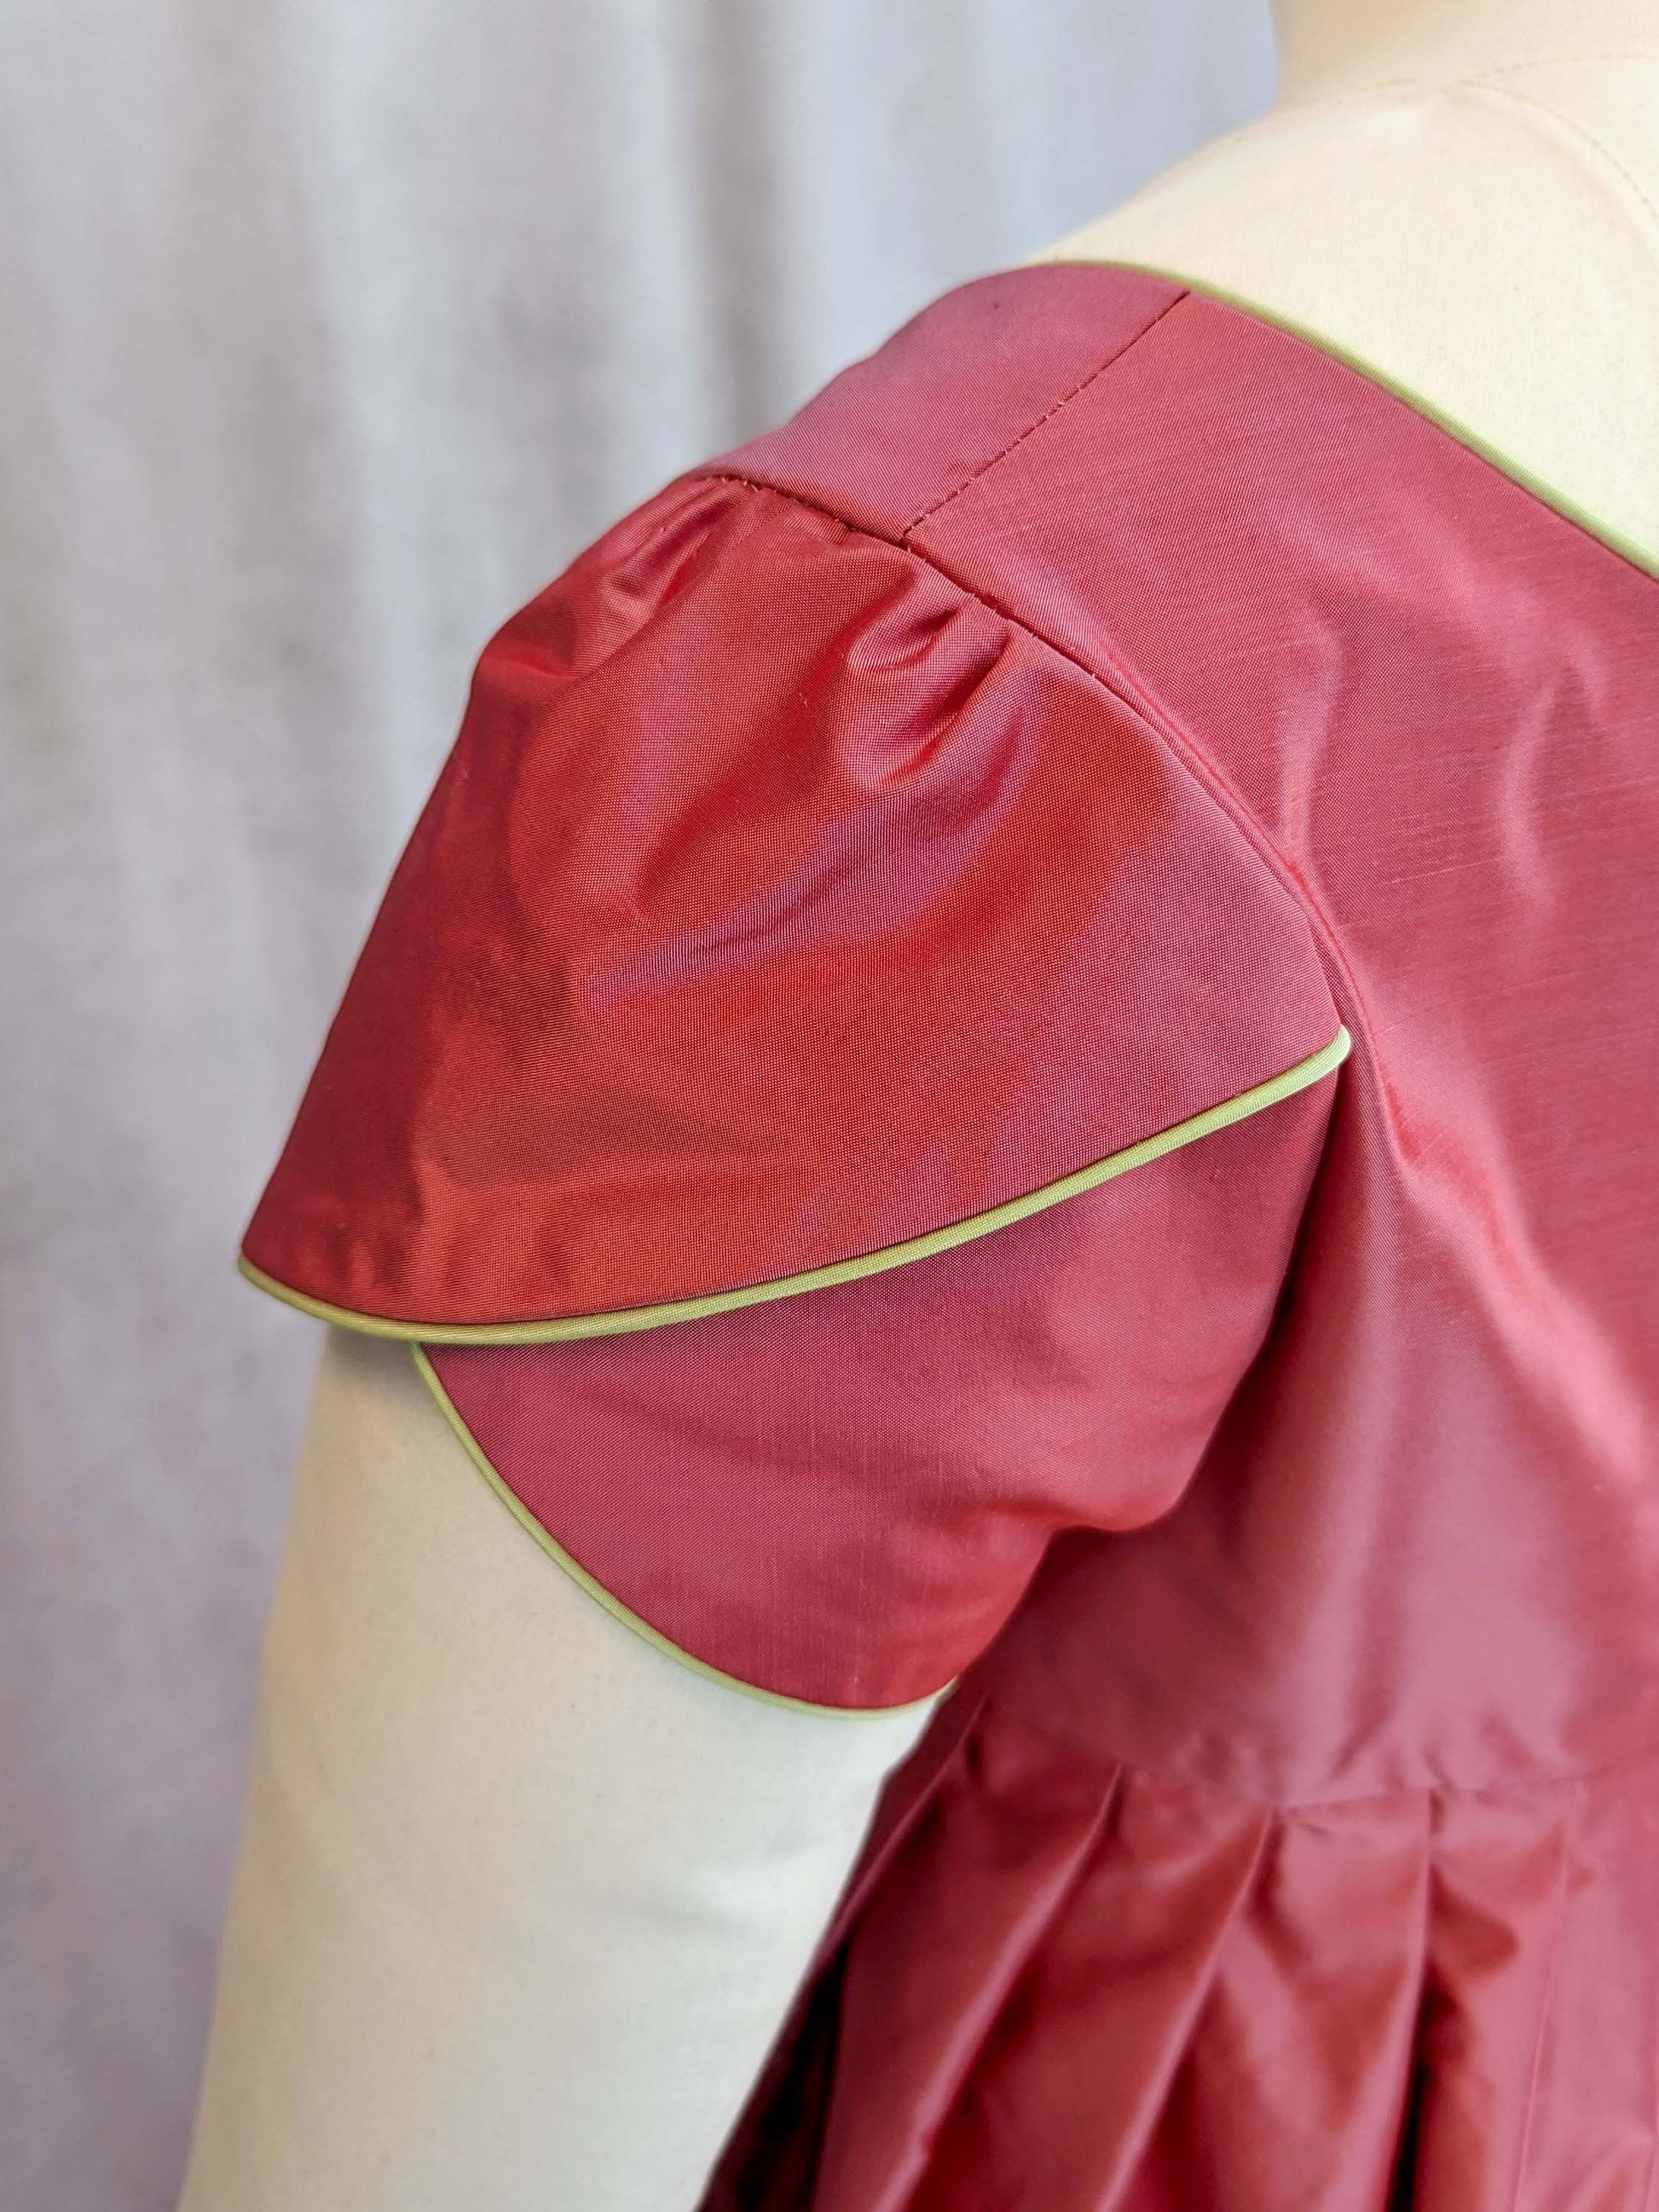 How to sew a tulip sleeve - Photo instructions for beginners (+ Free  pattern) 